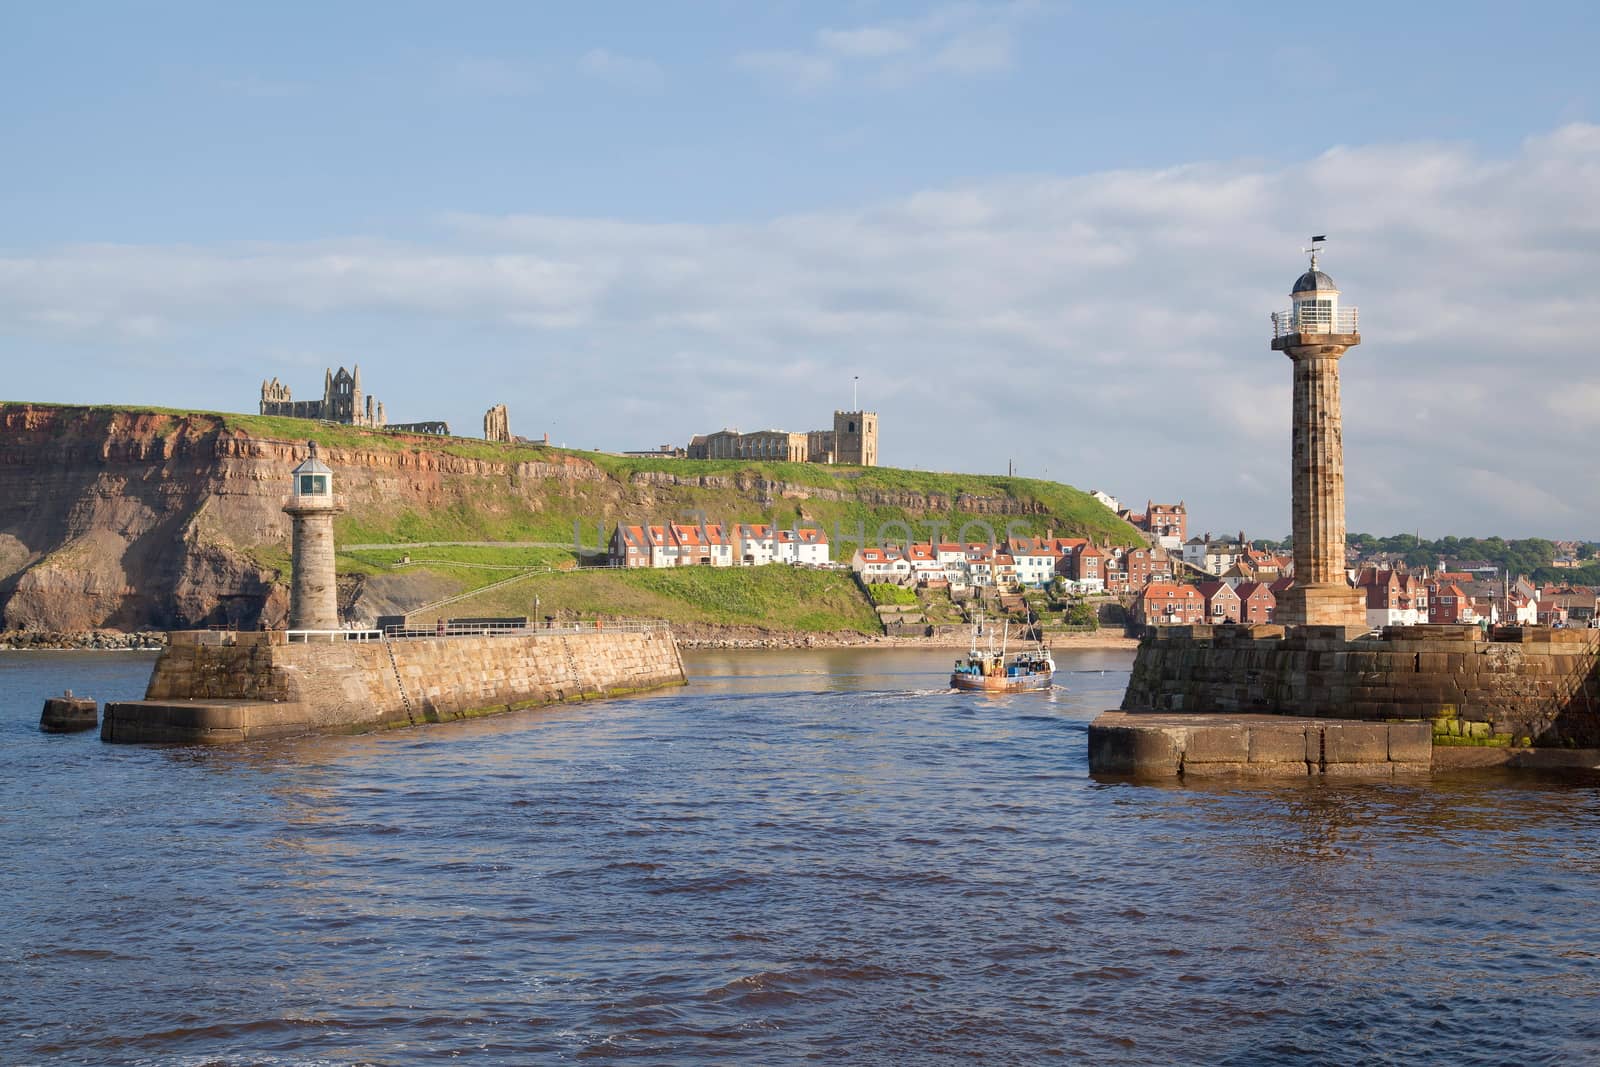 The harbour and lighthouses of Whitby